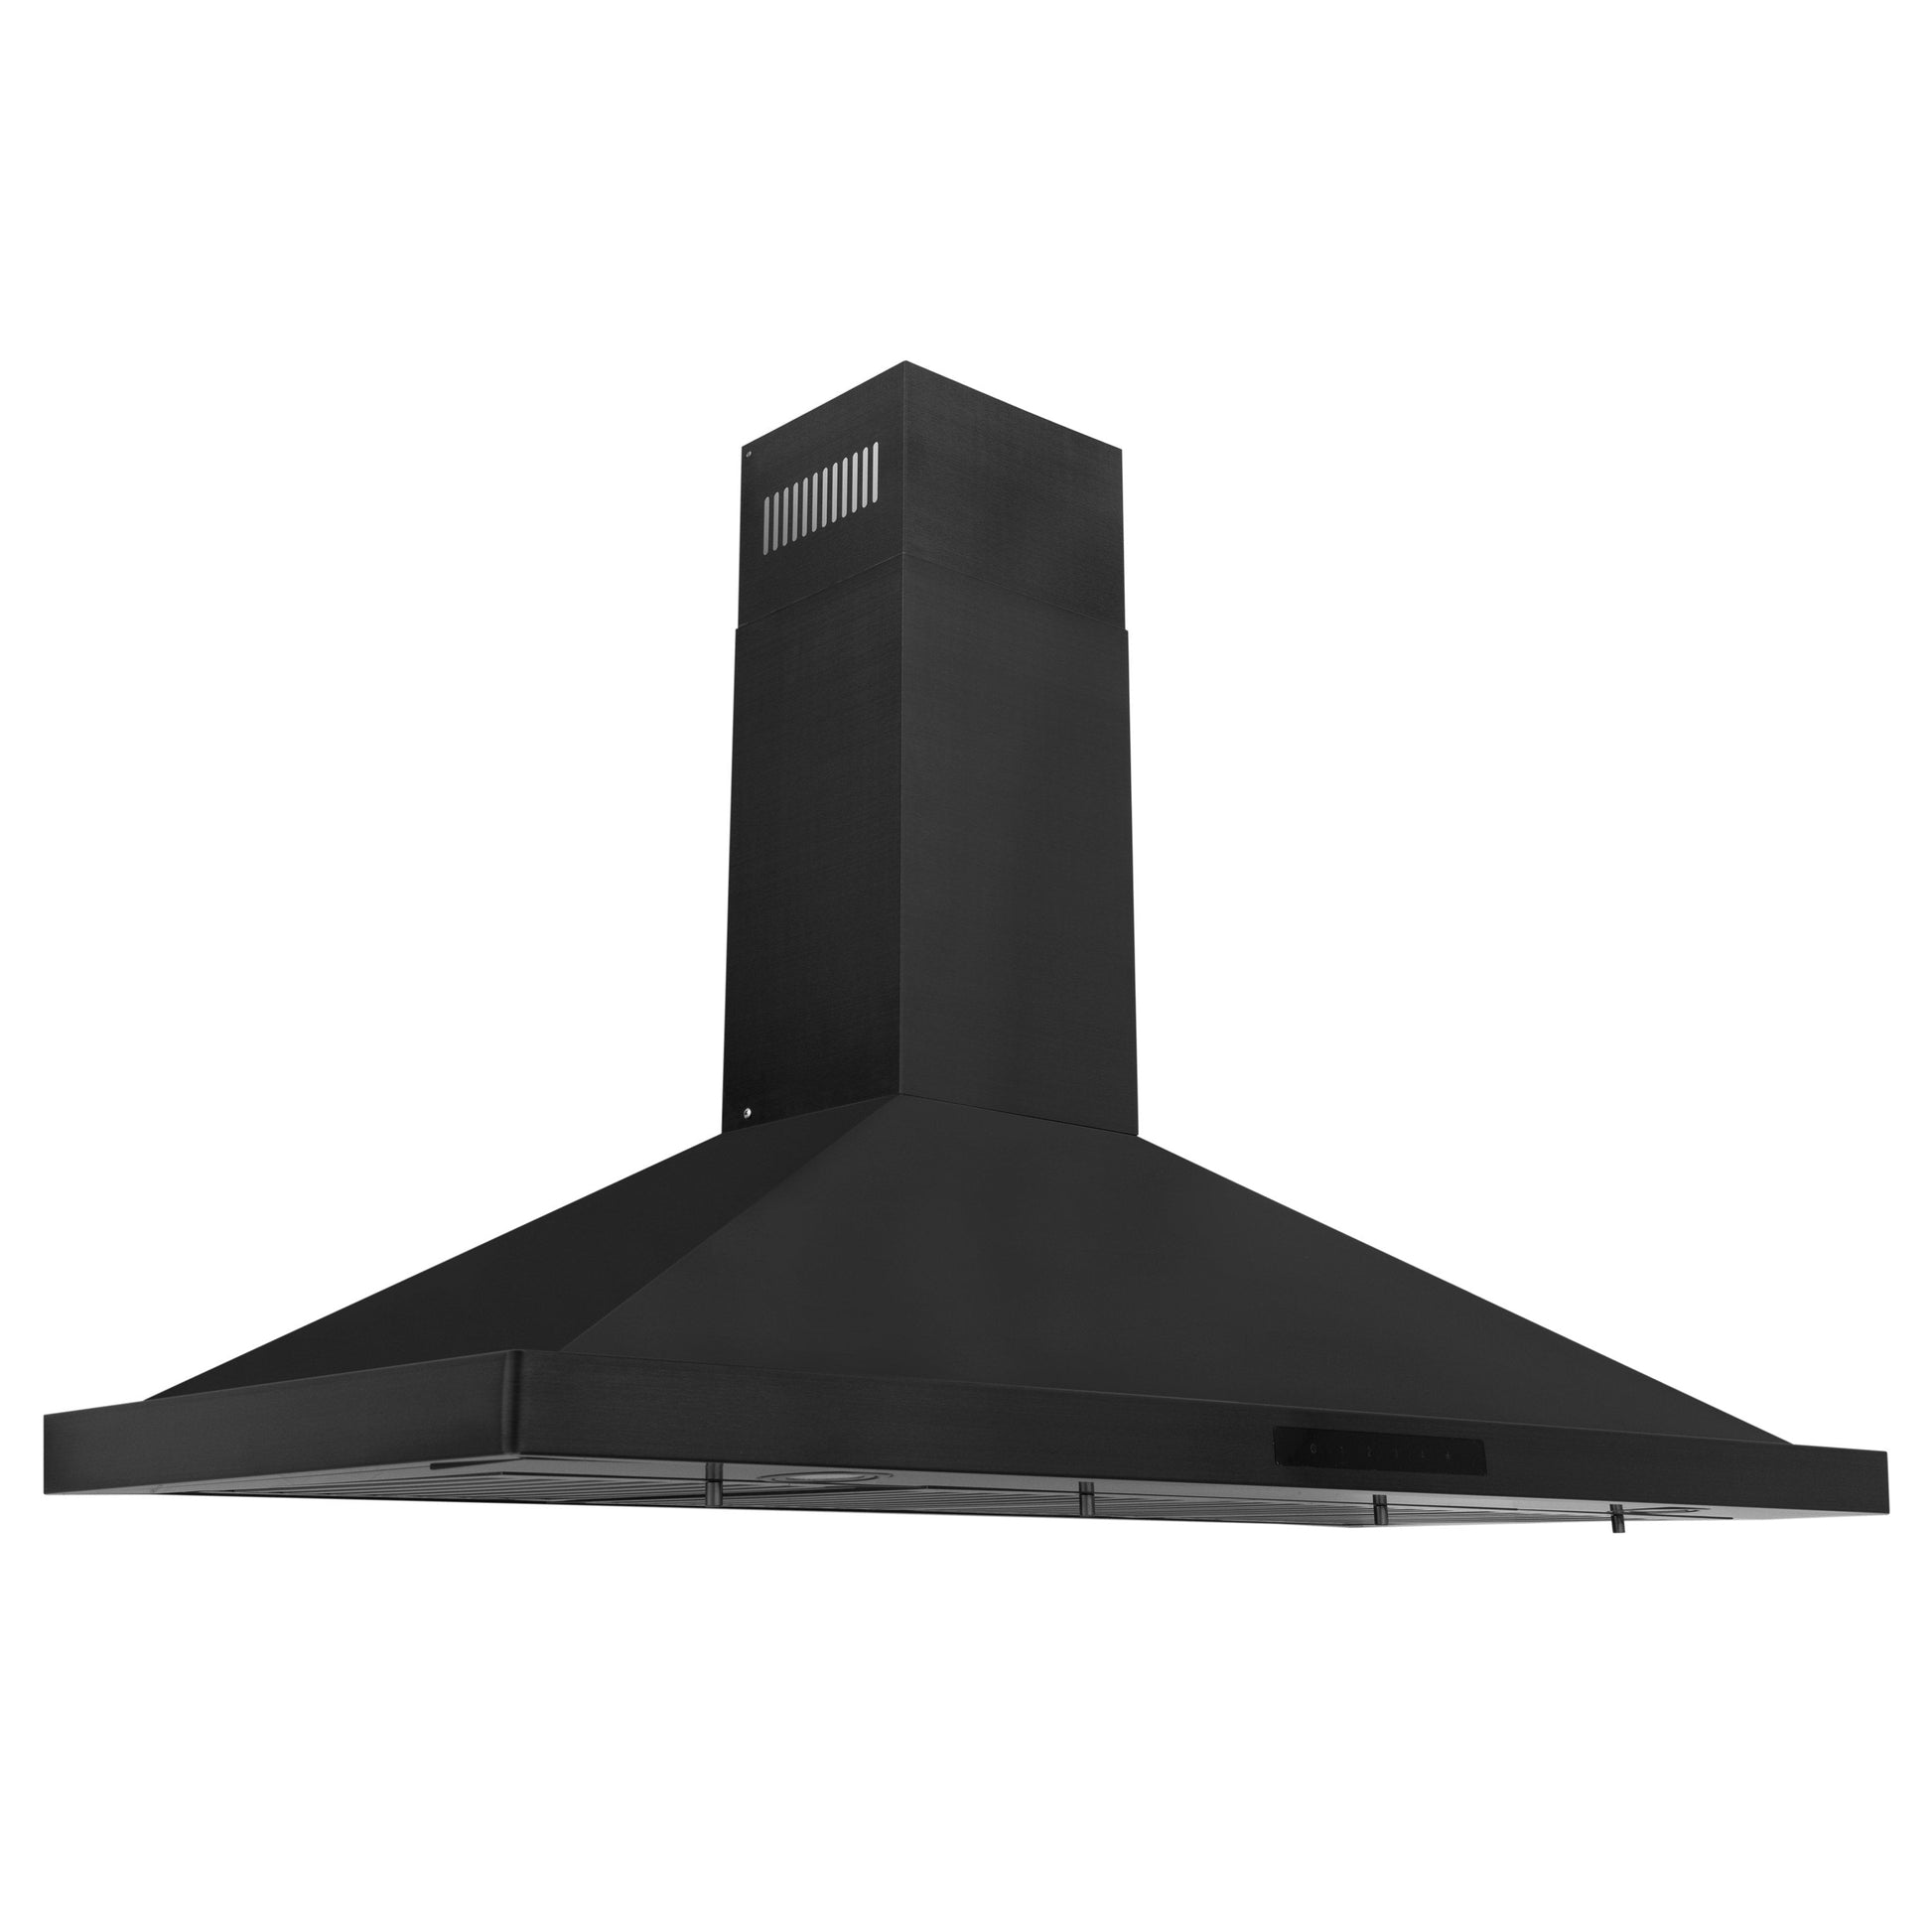 ZLINE 42" Recirculating Wall Mount Range Hood - Black Stainless Steel with Charcoal Filters